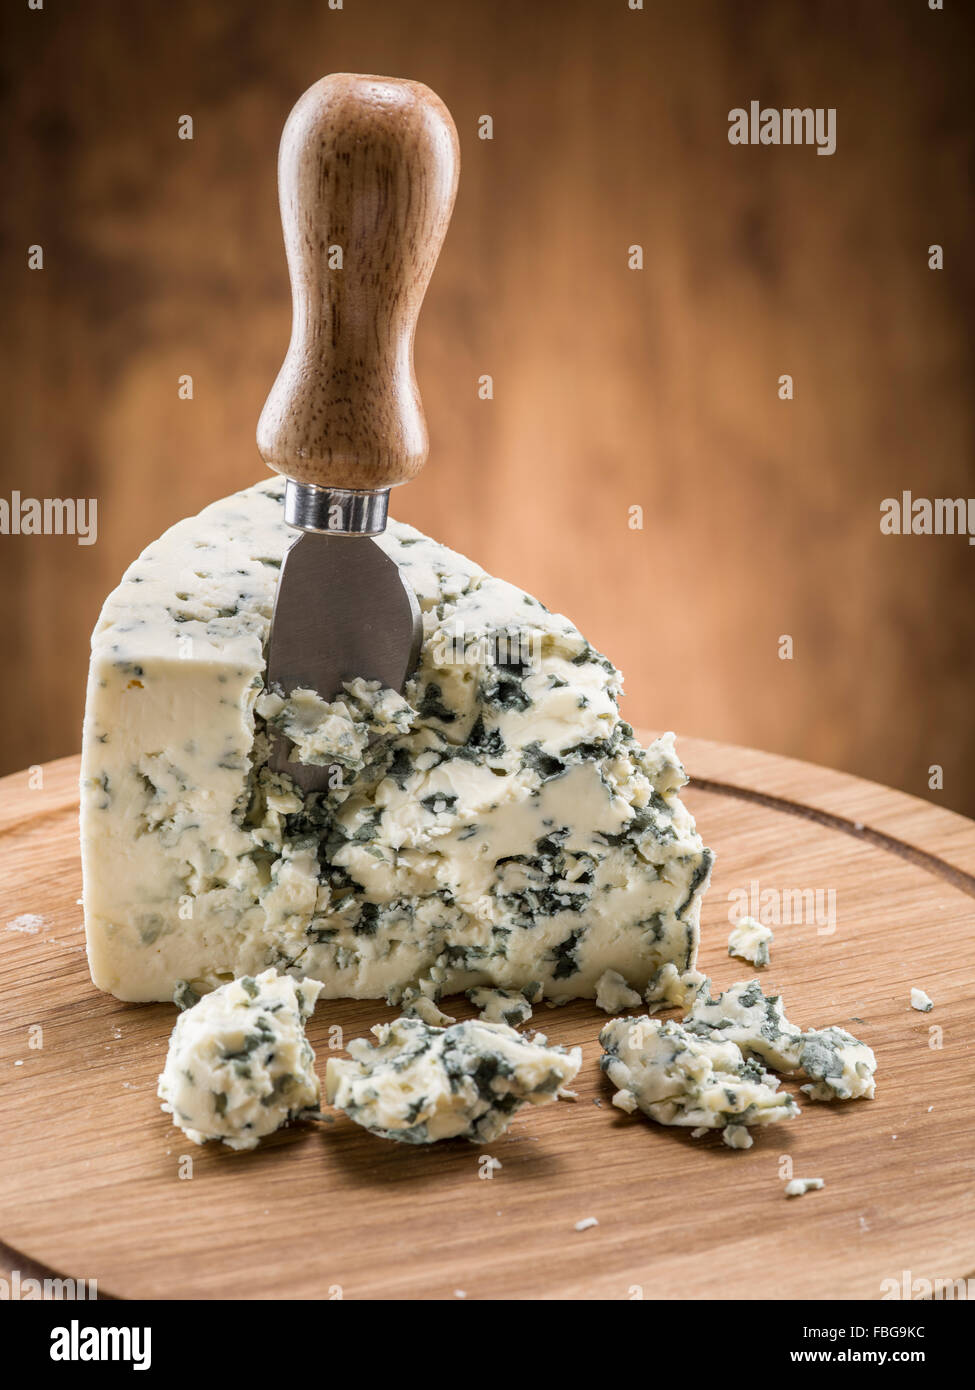 Danish blue cheese on a wooden board. Stock Photo